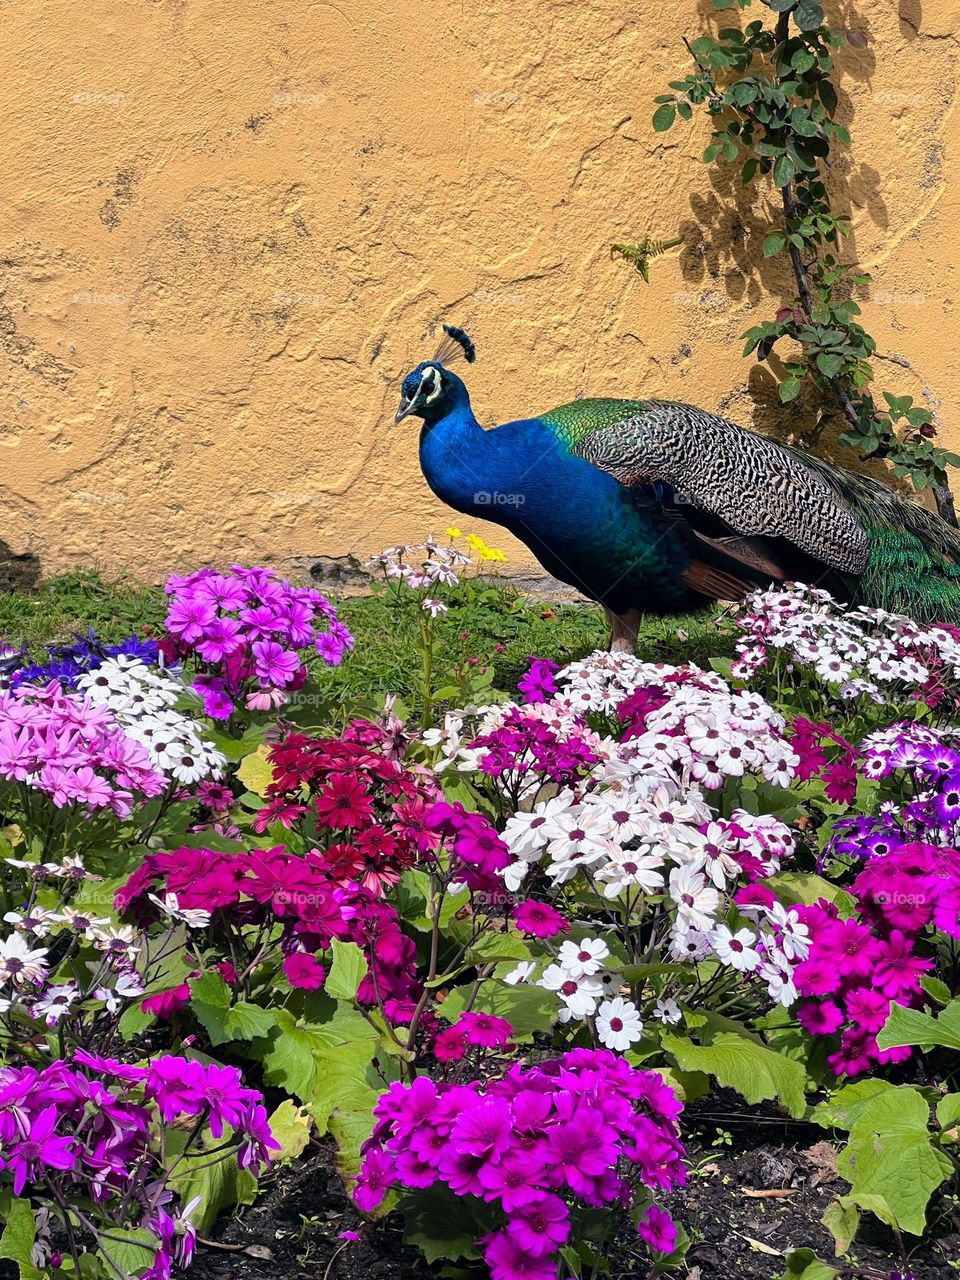 Peacock and flowers